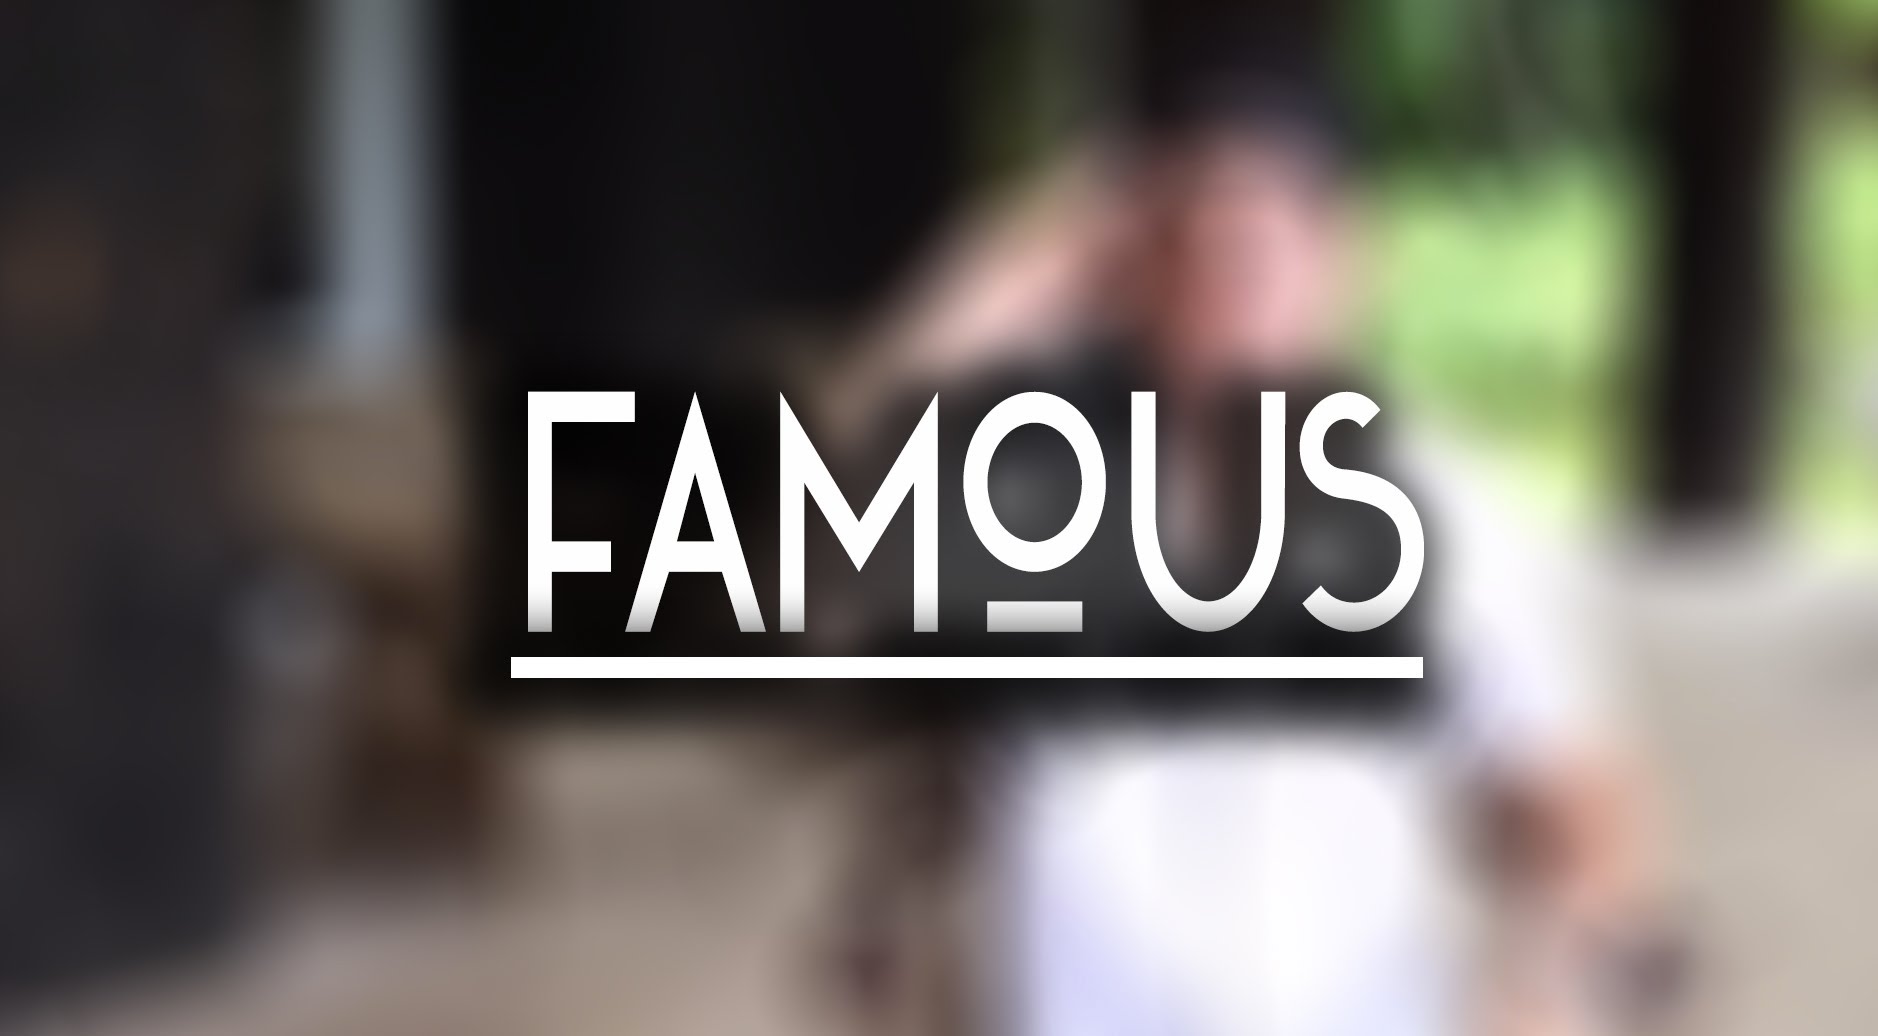 HOW TO BE FAMOUS - YouTube